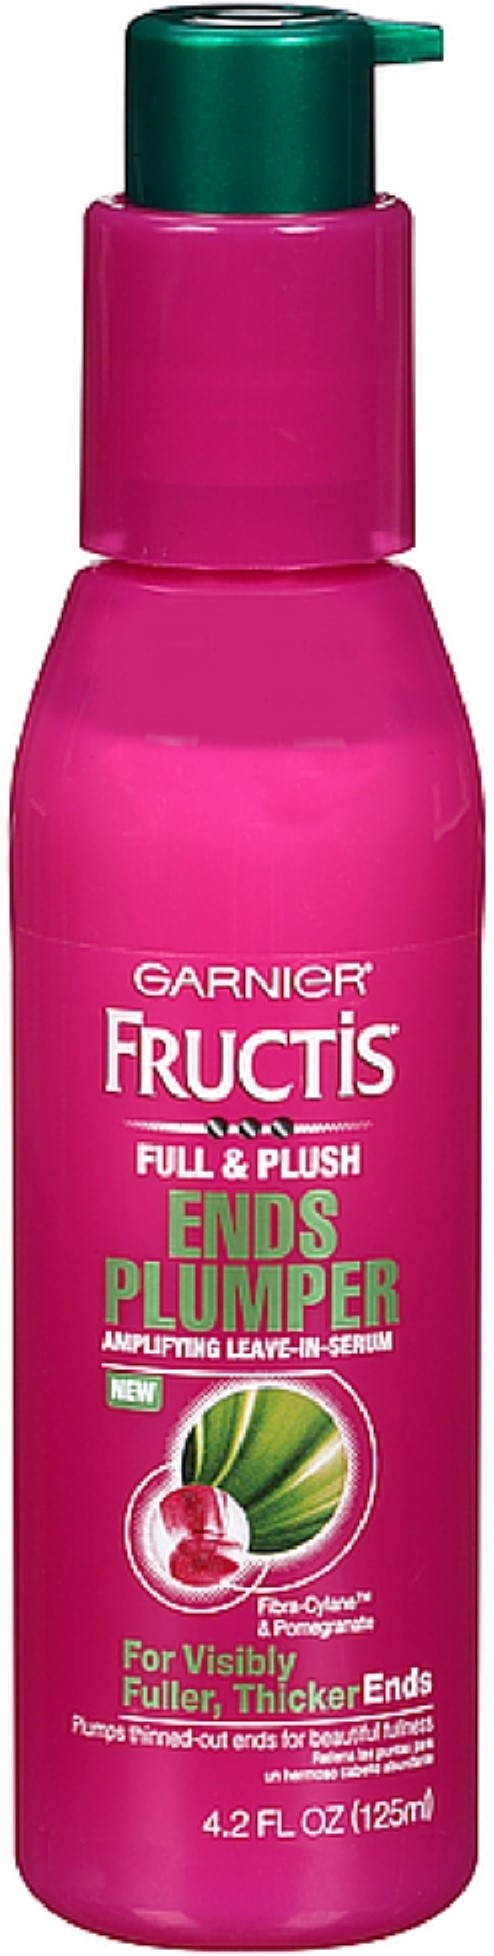 Garnier Hair Care Fructis Ends Plumper, Visibly Fuller/Thicker Ends, 4.2 Fluid Ounce - image 1 of 3